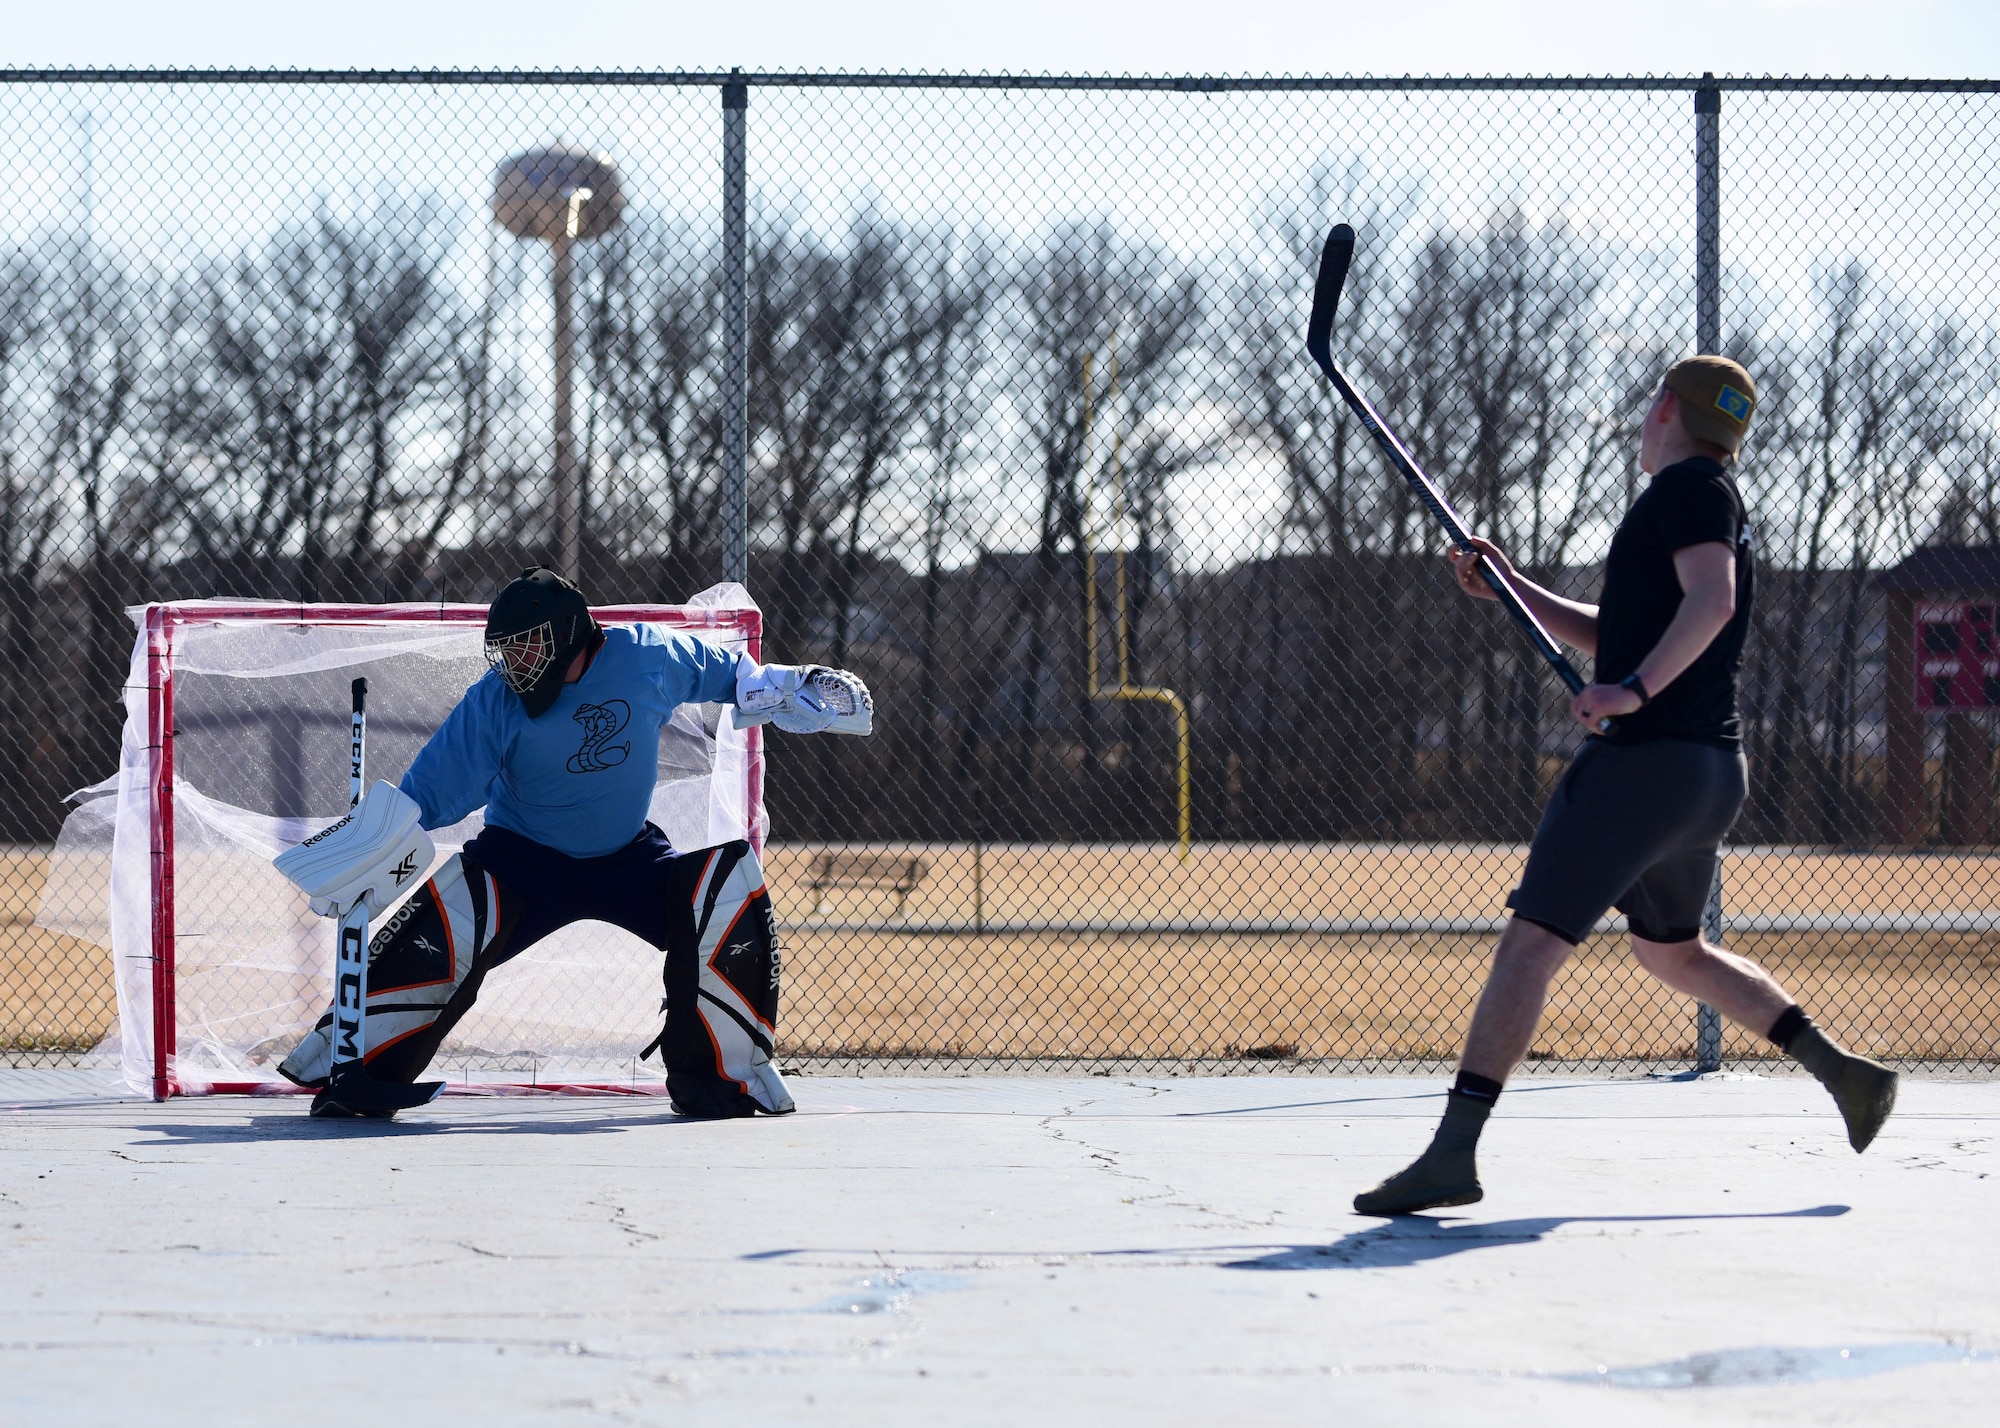 Members of Team Whiteman participate in the first extramural hockey practice at Whiteman Air Force Base, Mo., Feb. 17, 2018. Only one goal and goalkeeper were available for the initial meeting. (U.S. Air Force photo by Staff Sgt. Danielle Quilla)